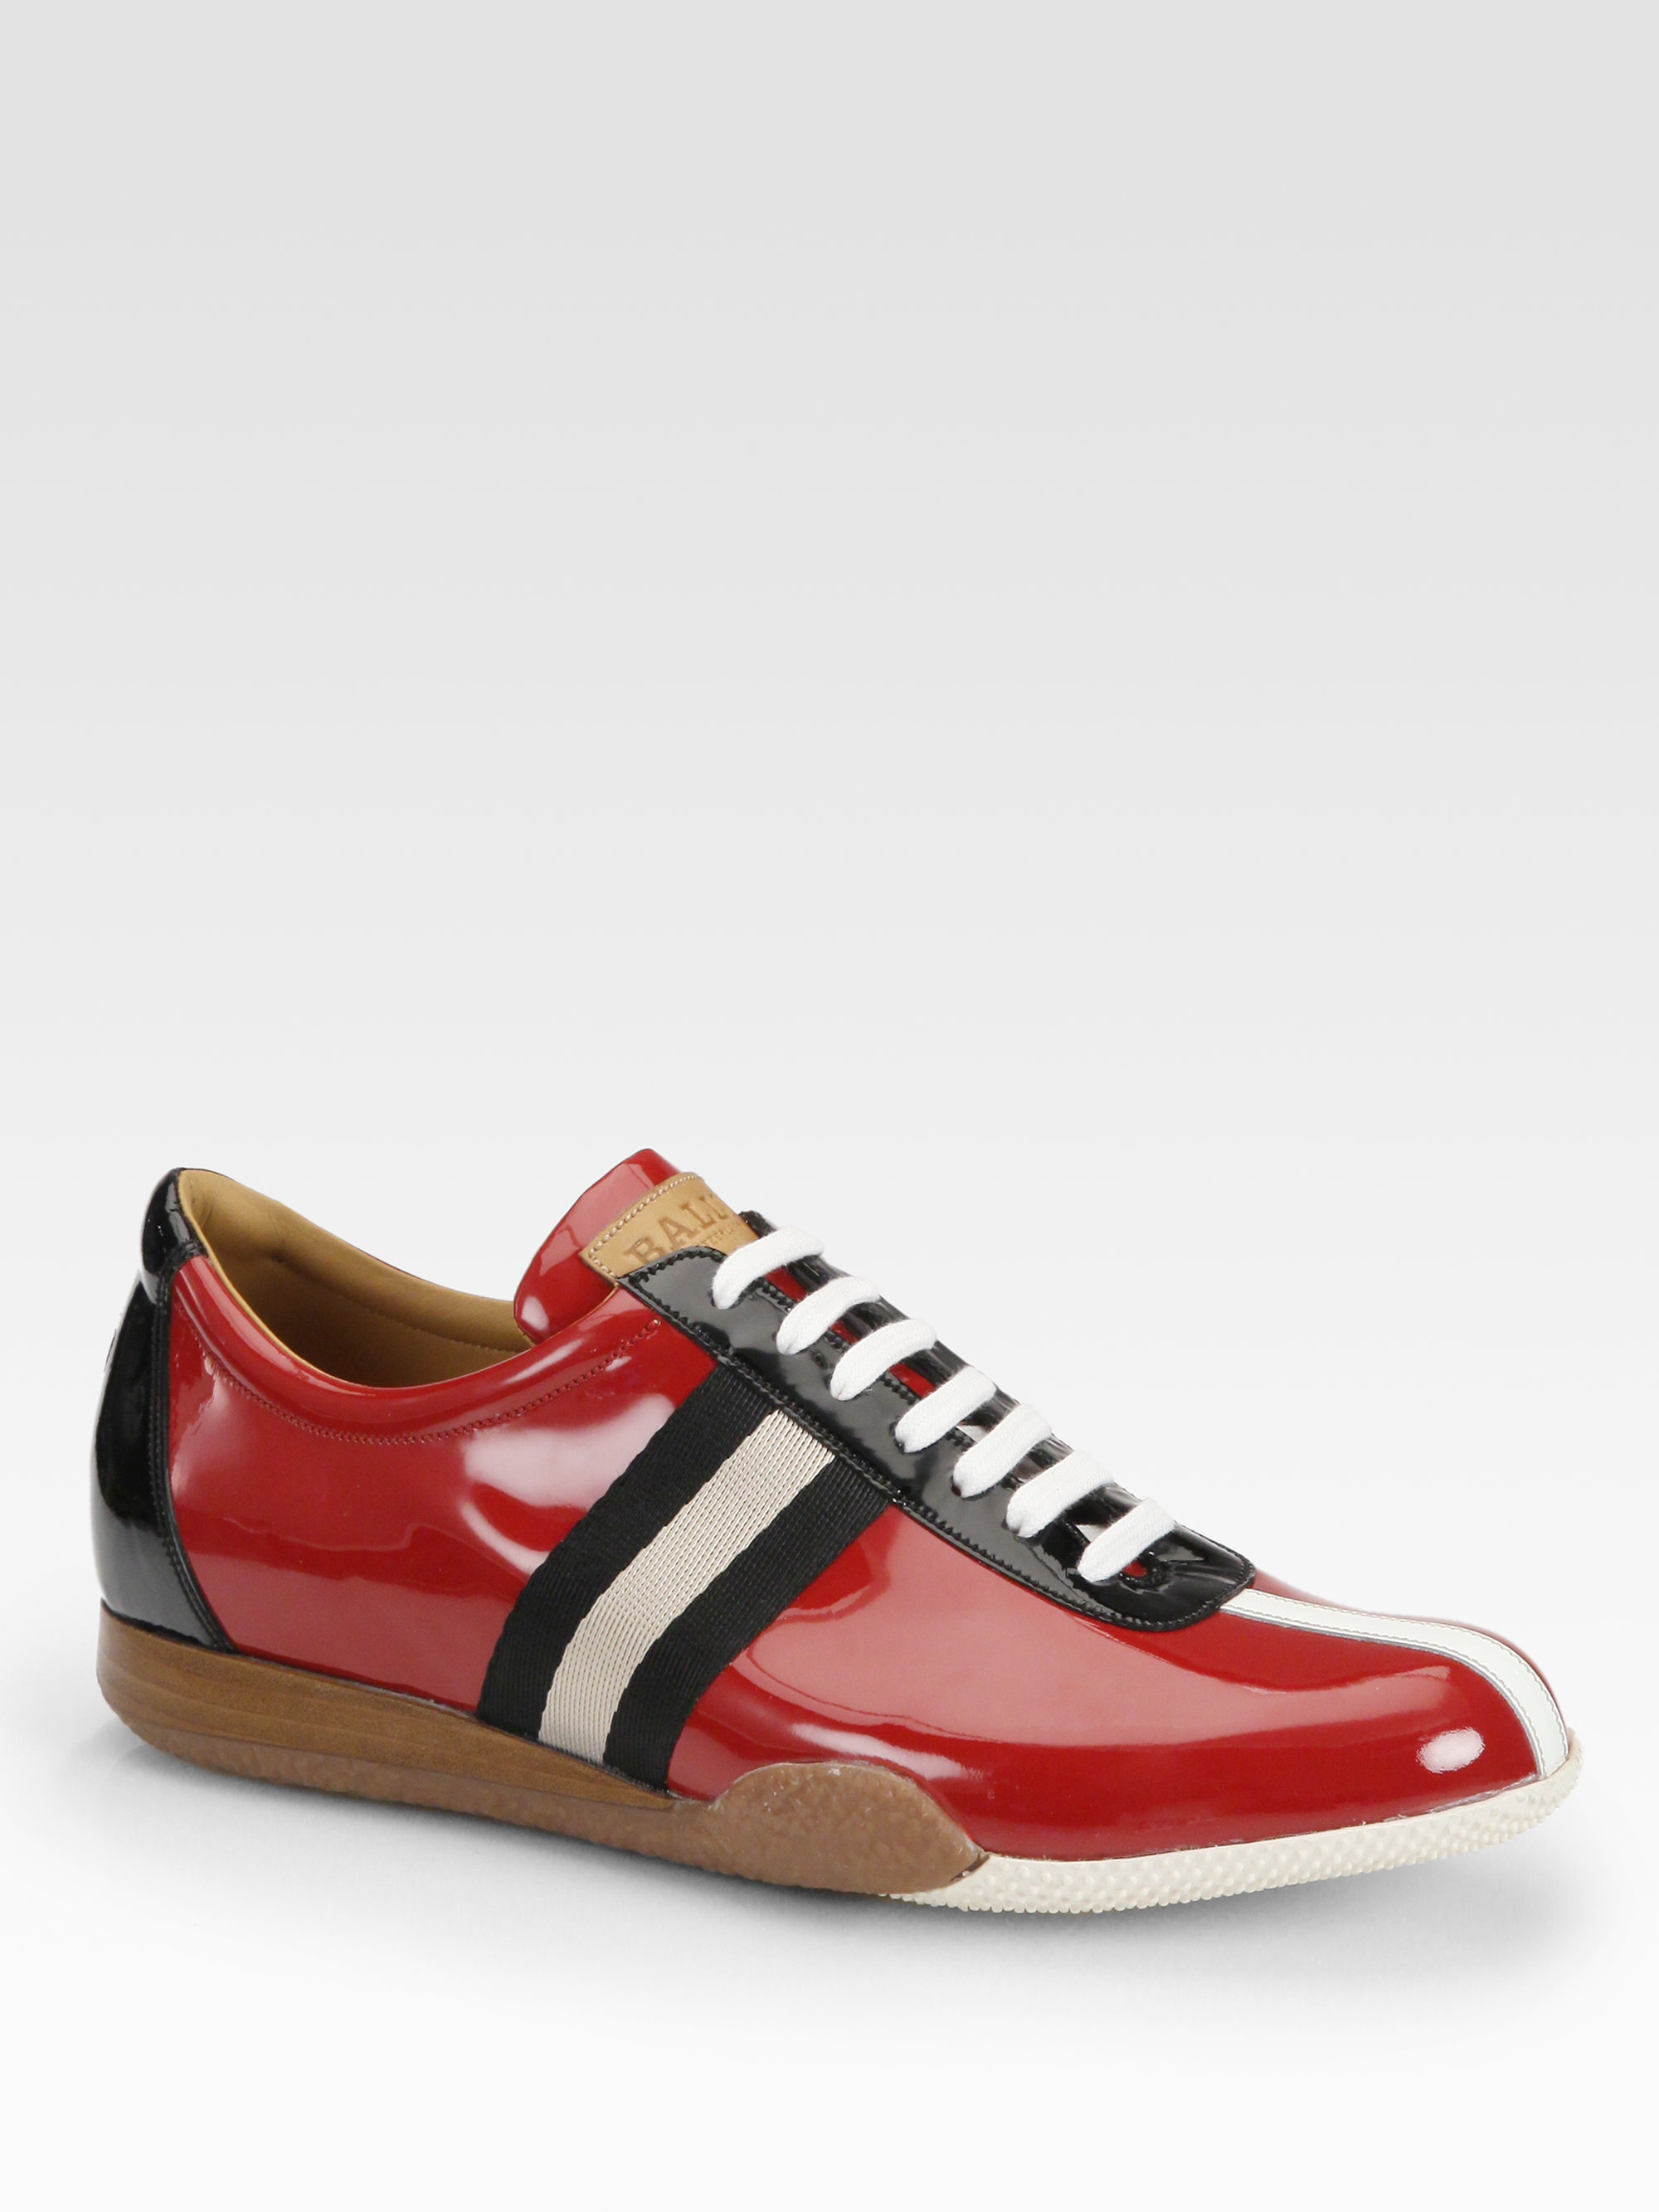 Bally Freenew Patent Leather Sneakers 